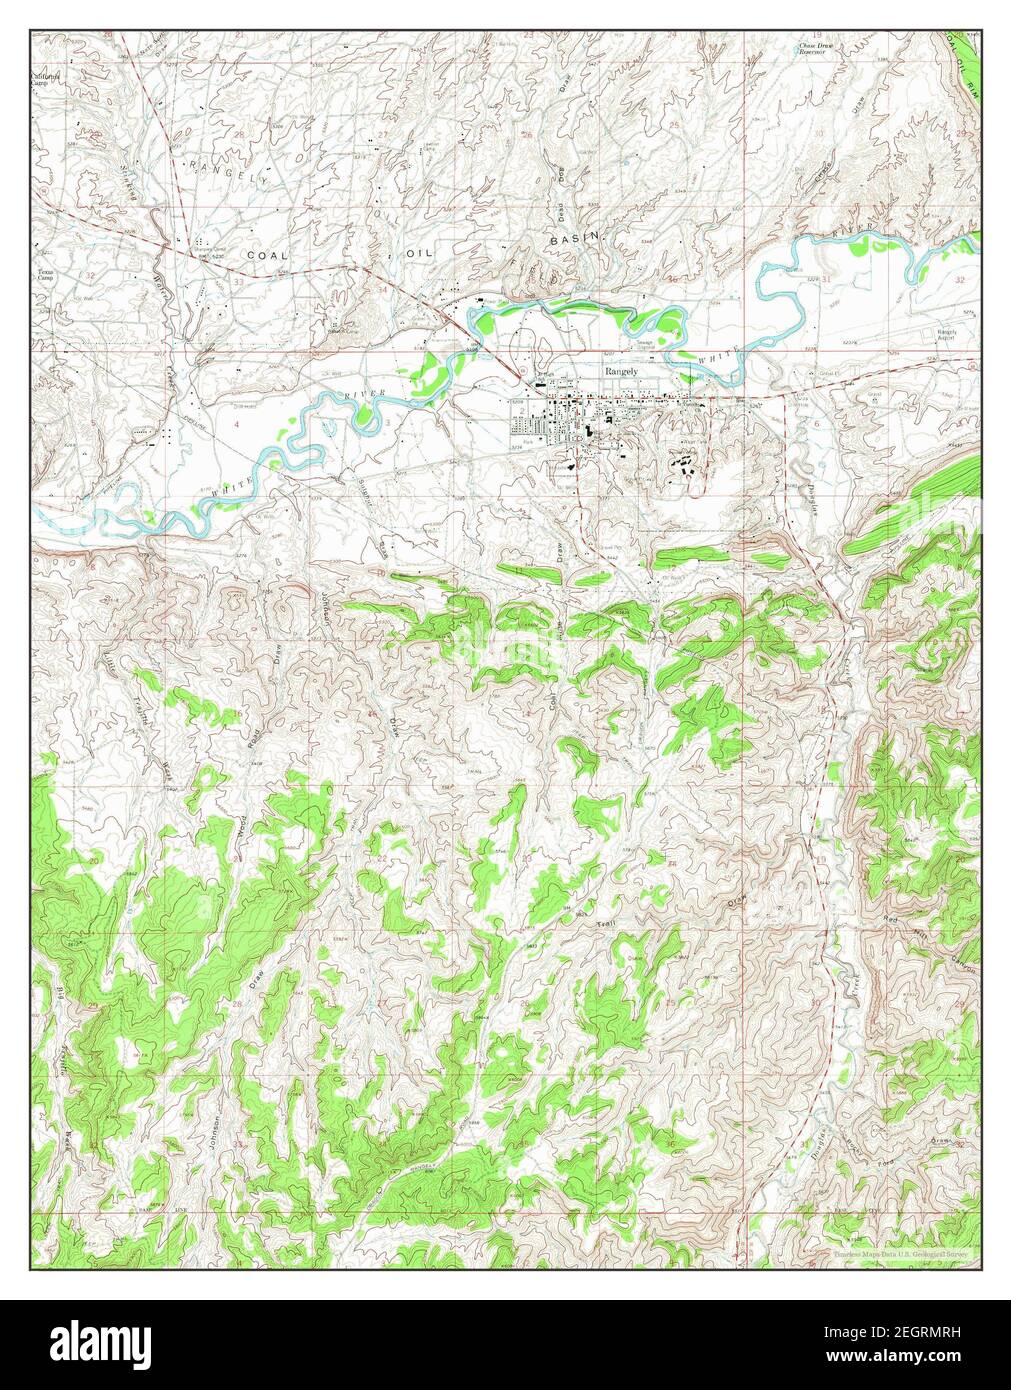 Rangely, Colorado, map 1962, 1:24000, United States of America by Timeless Maps, data U.S. Geological Survey Stock Photo